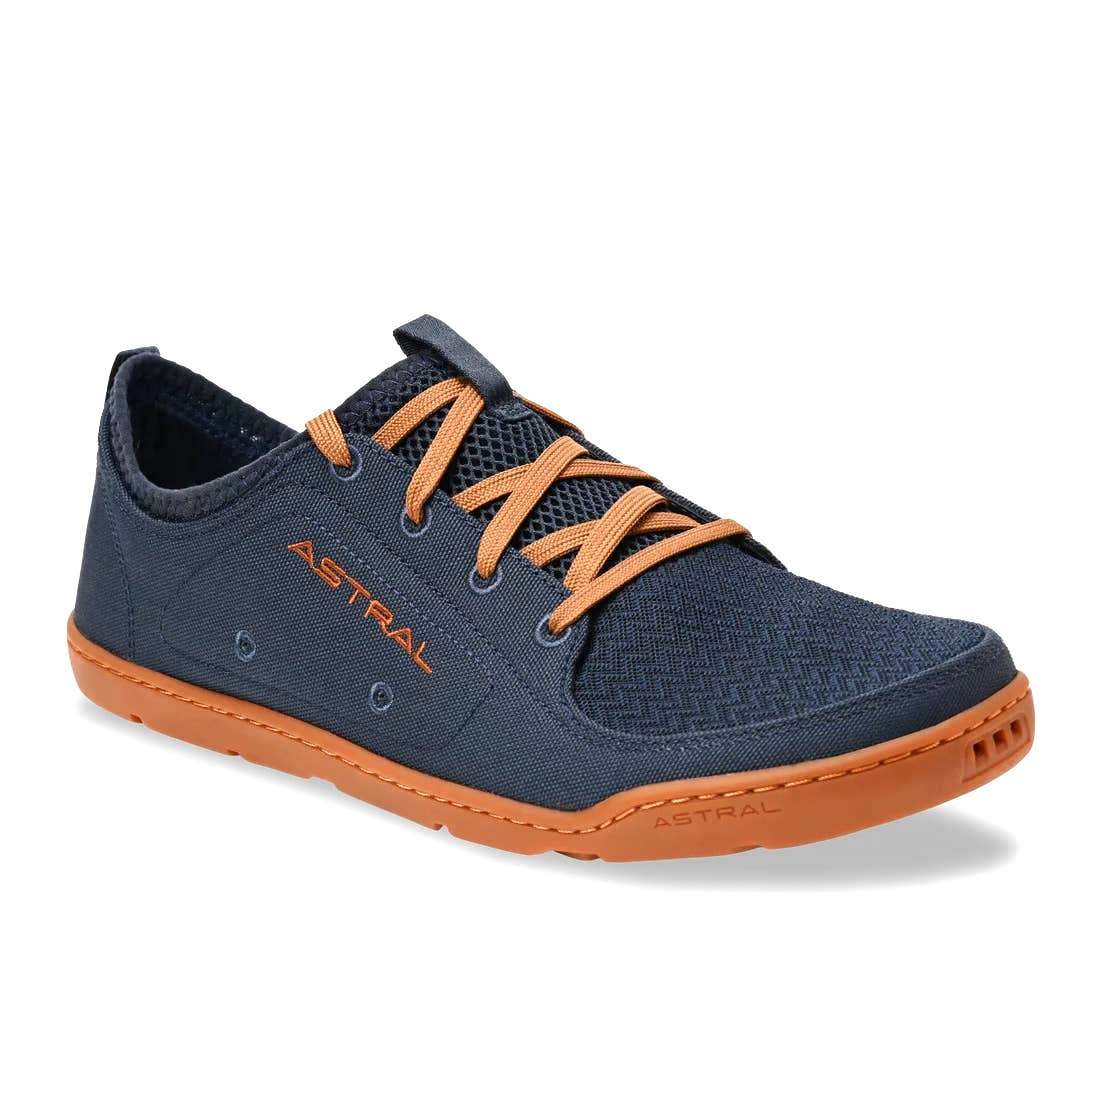 ASTRAL Loyak M's Lightweight Shoes - 12